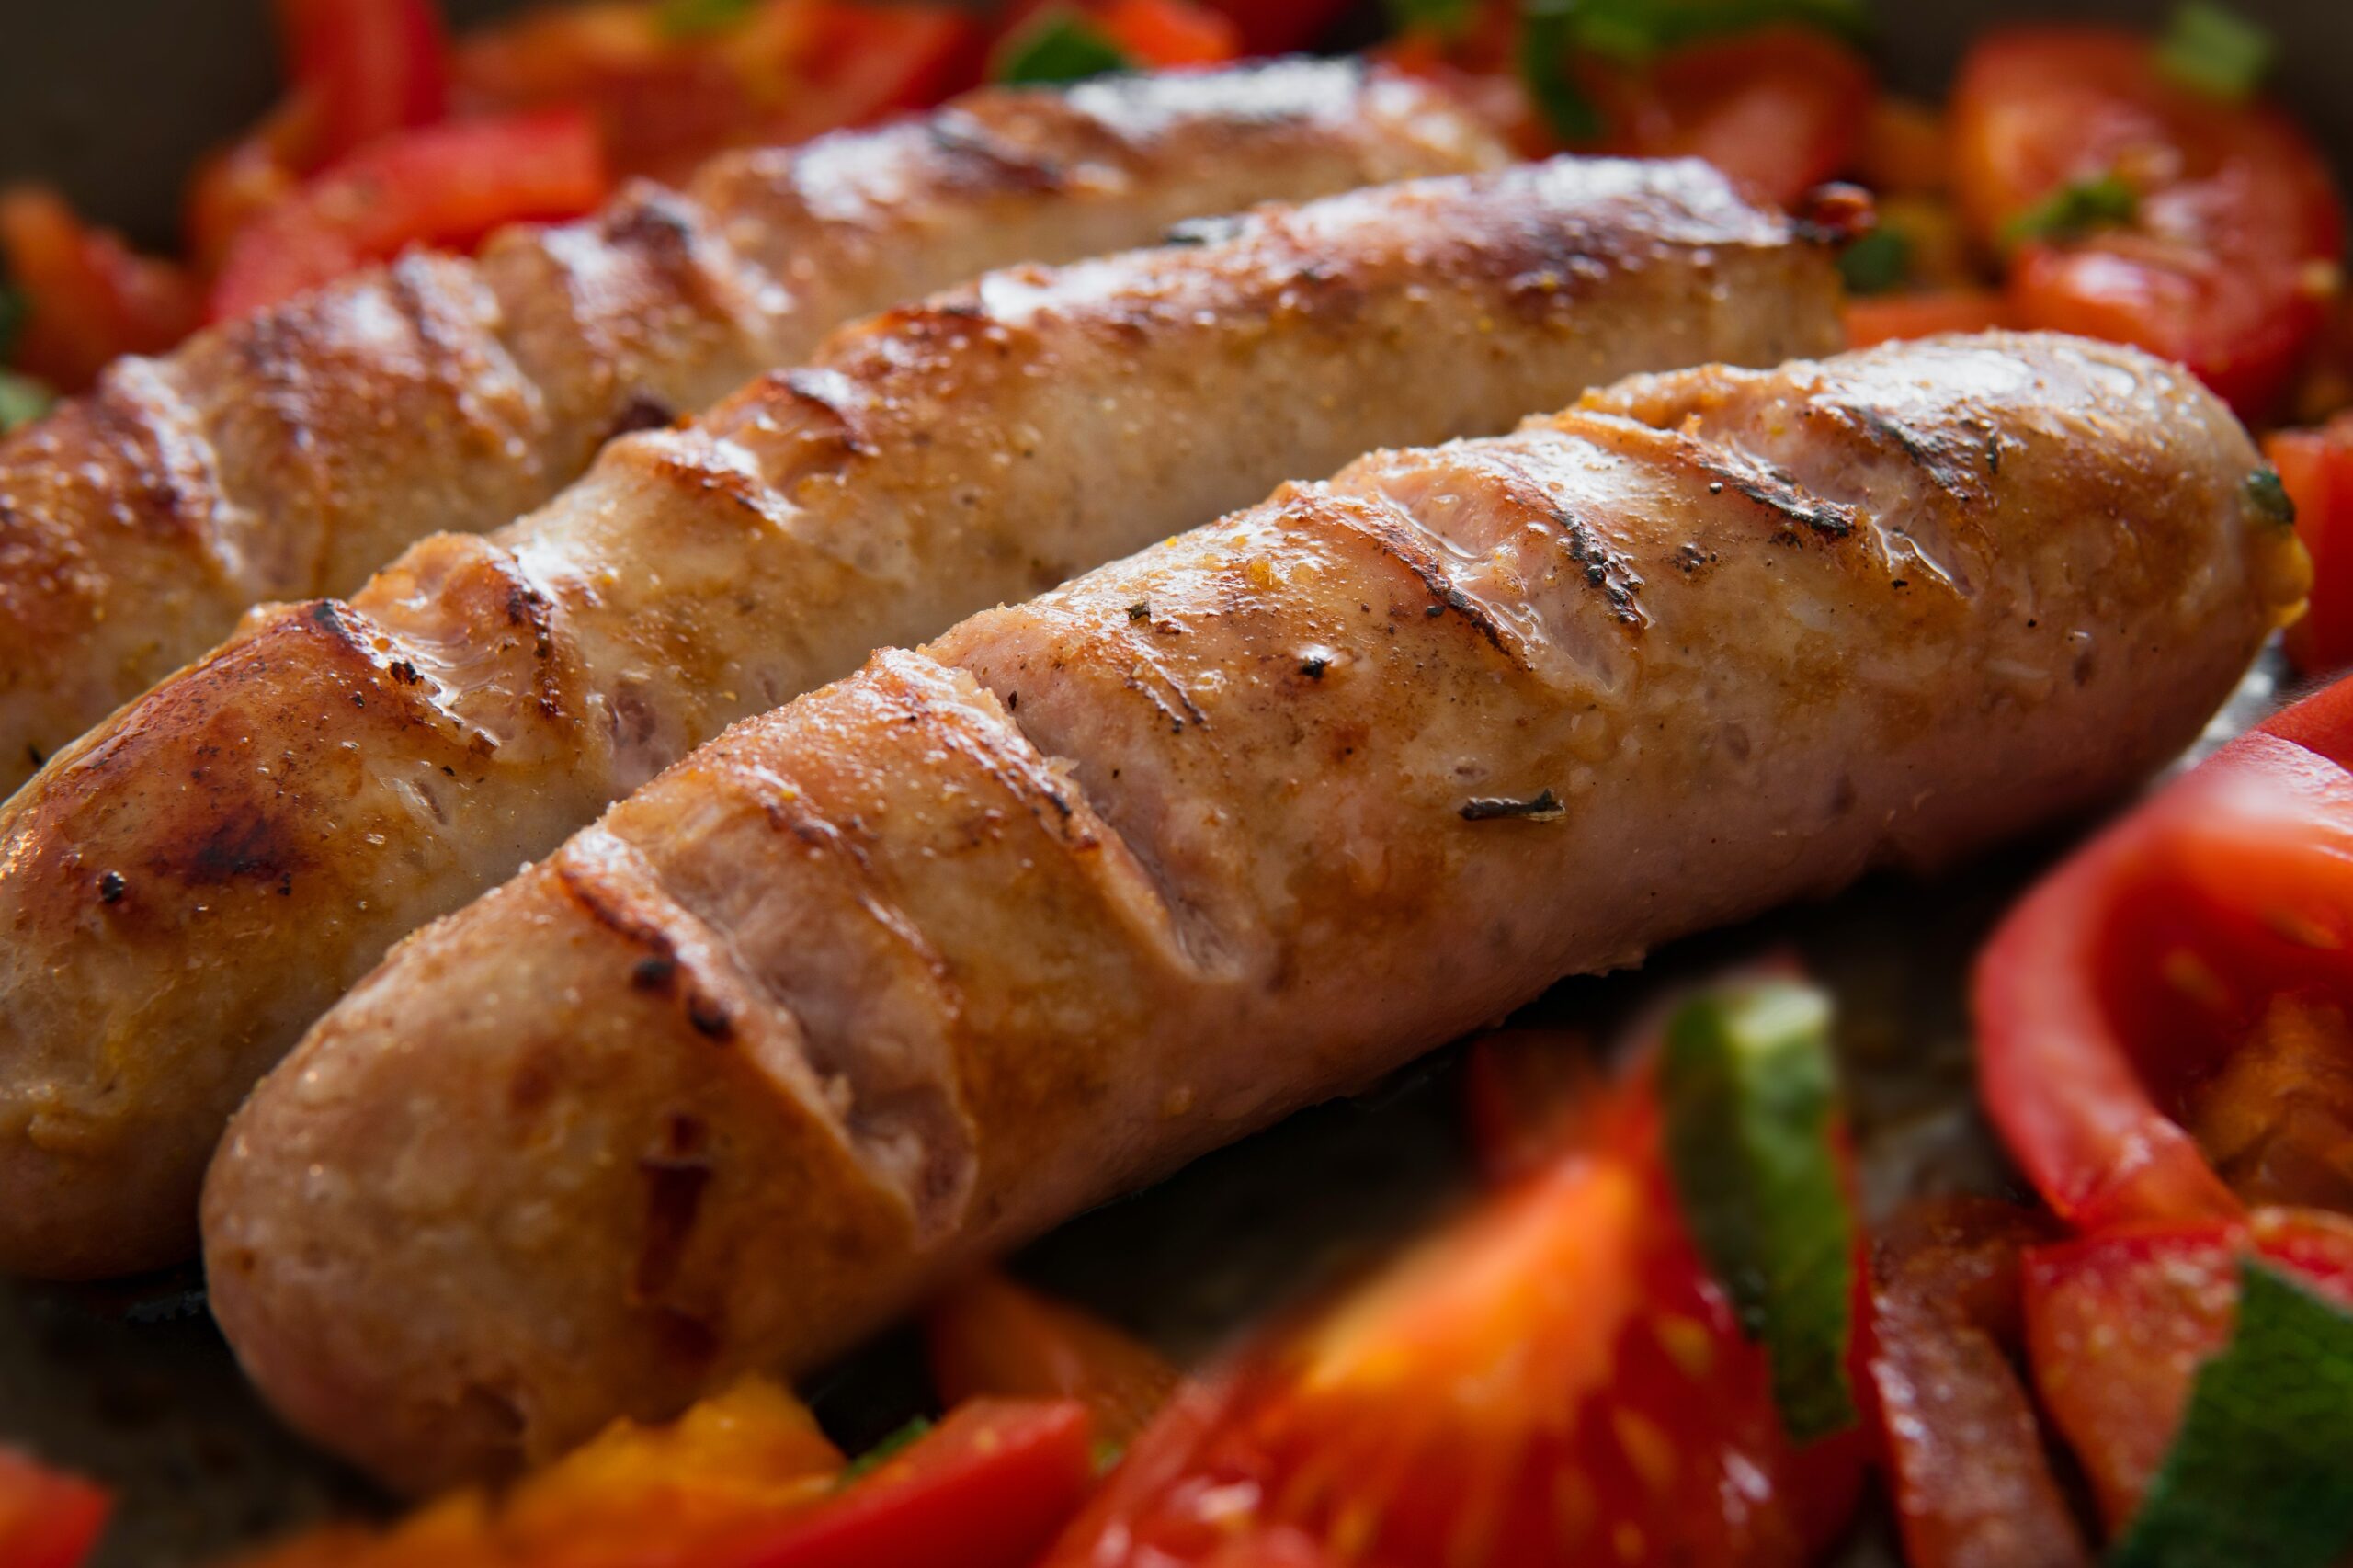 How to Tell if Sausage is Cooked?